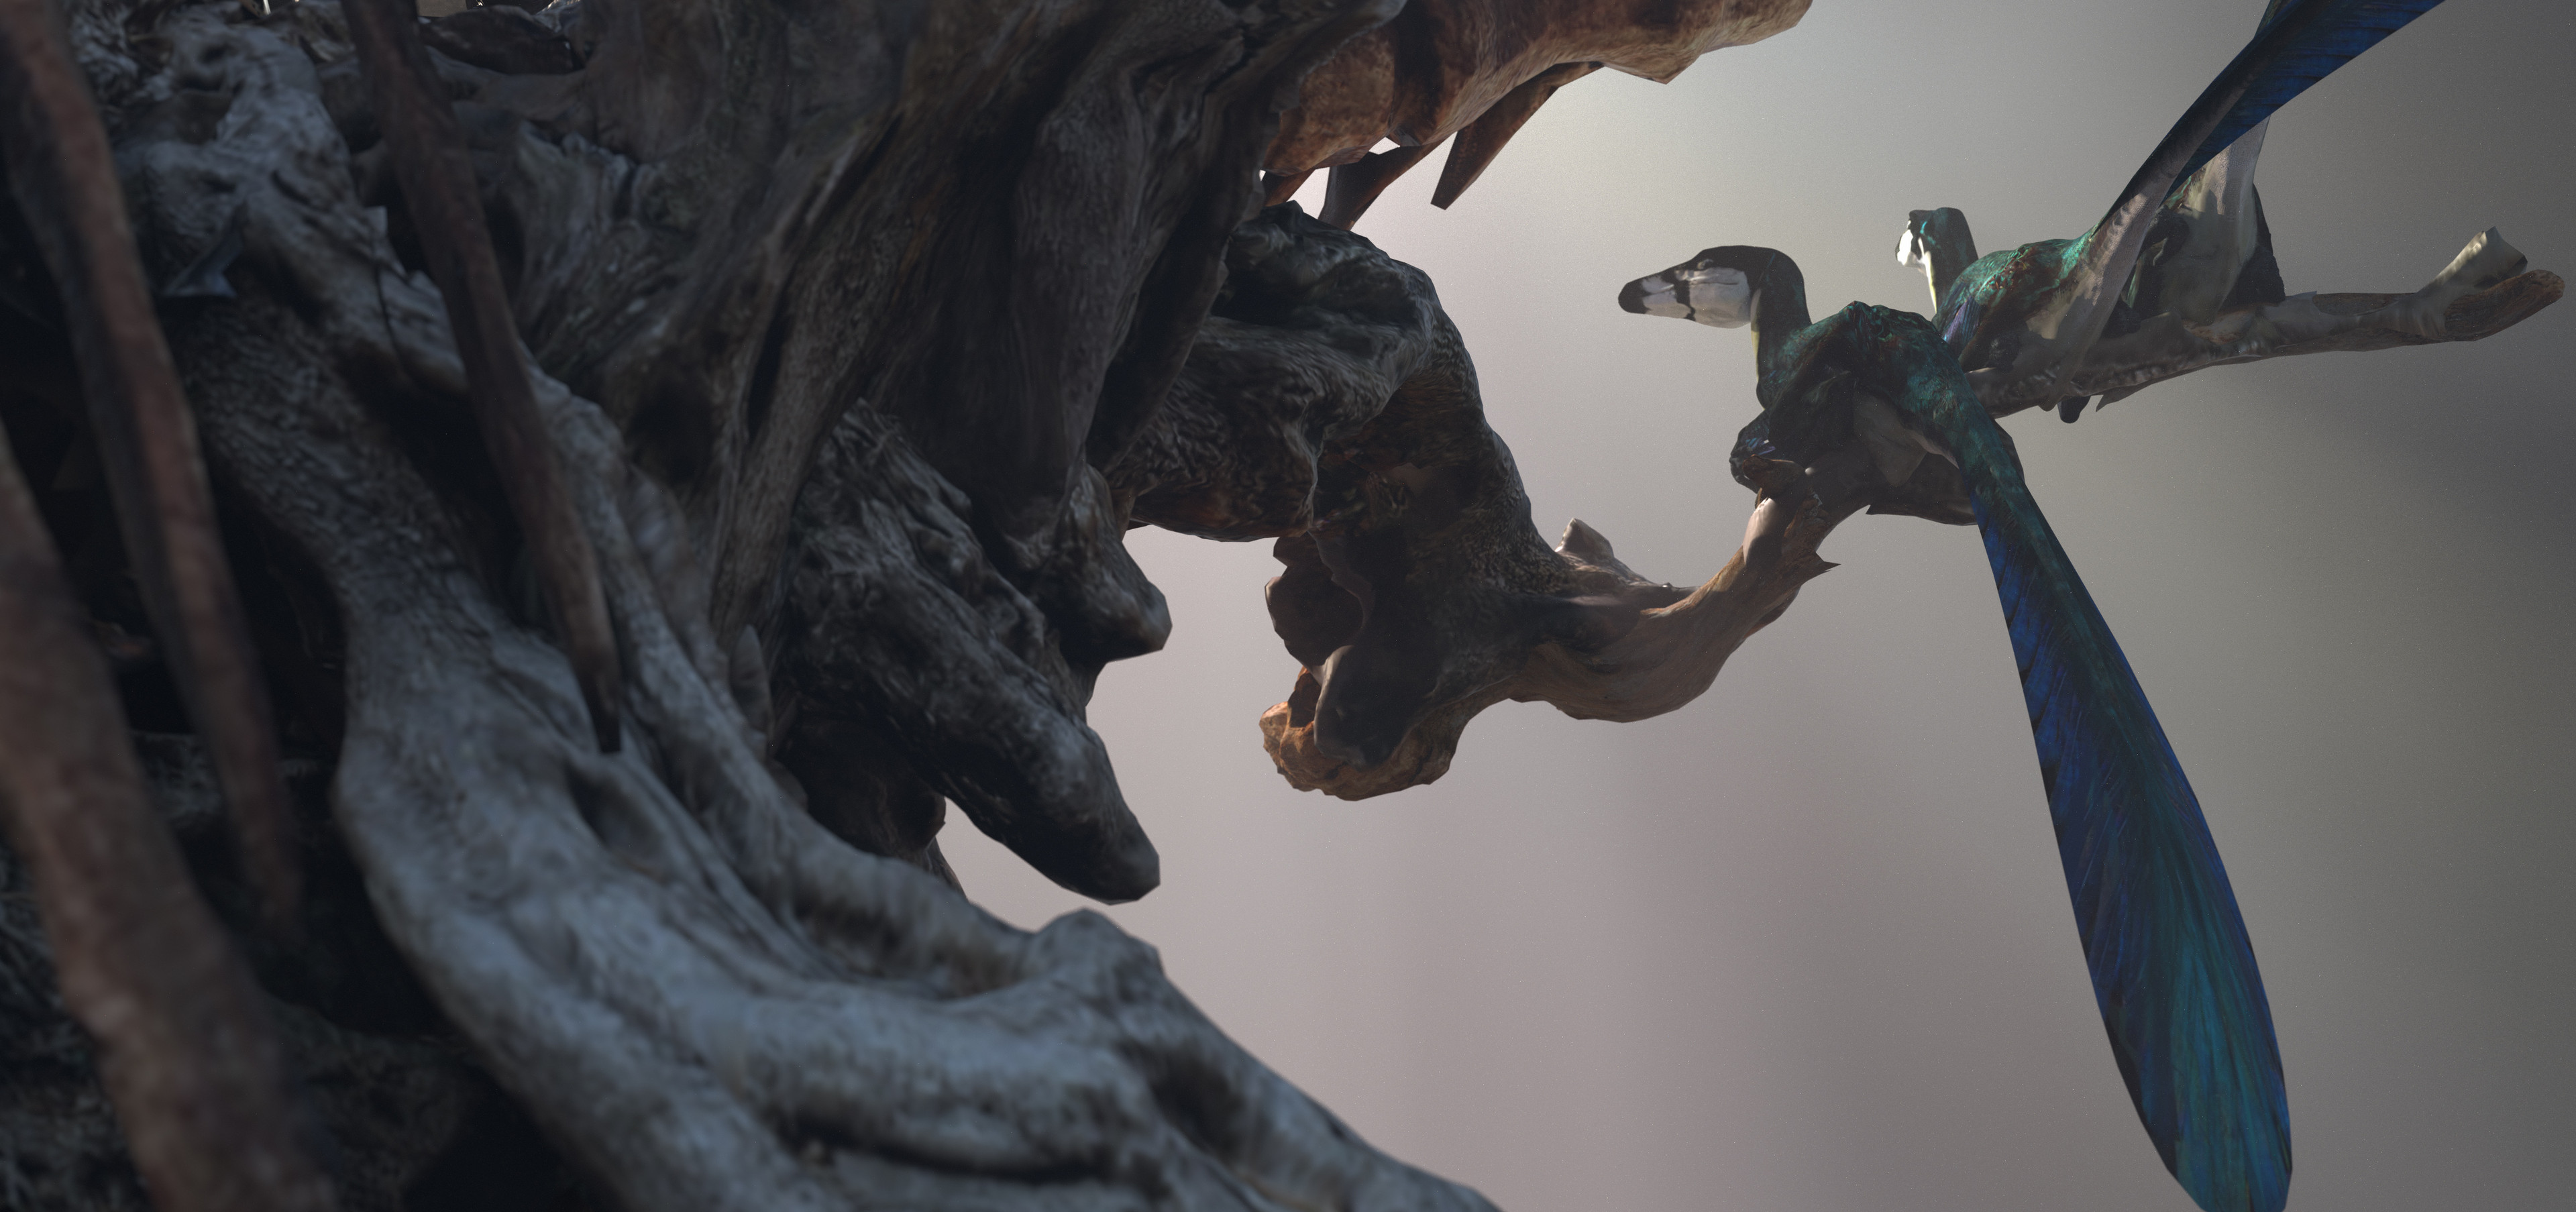 My initial 3D render from Octane